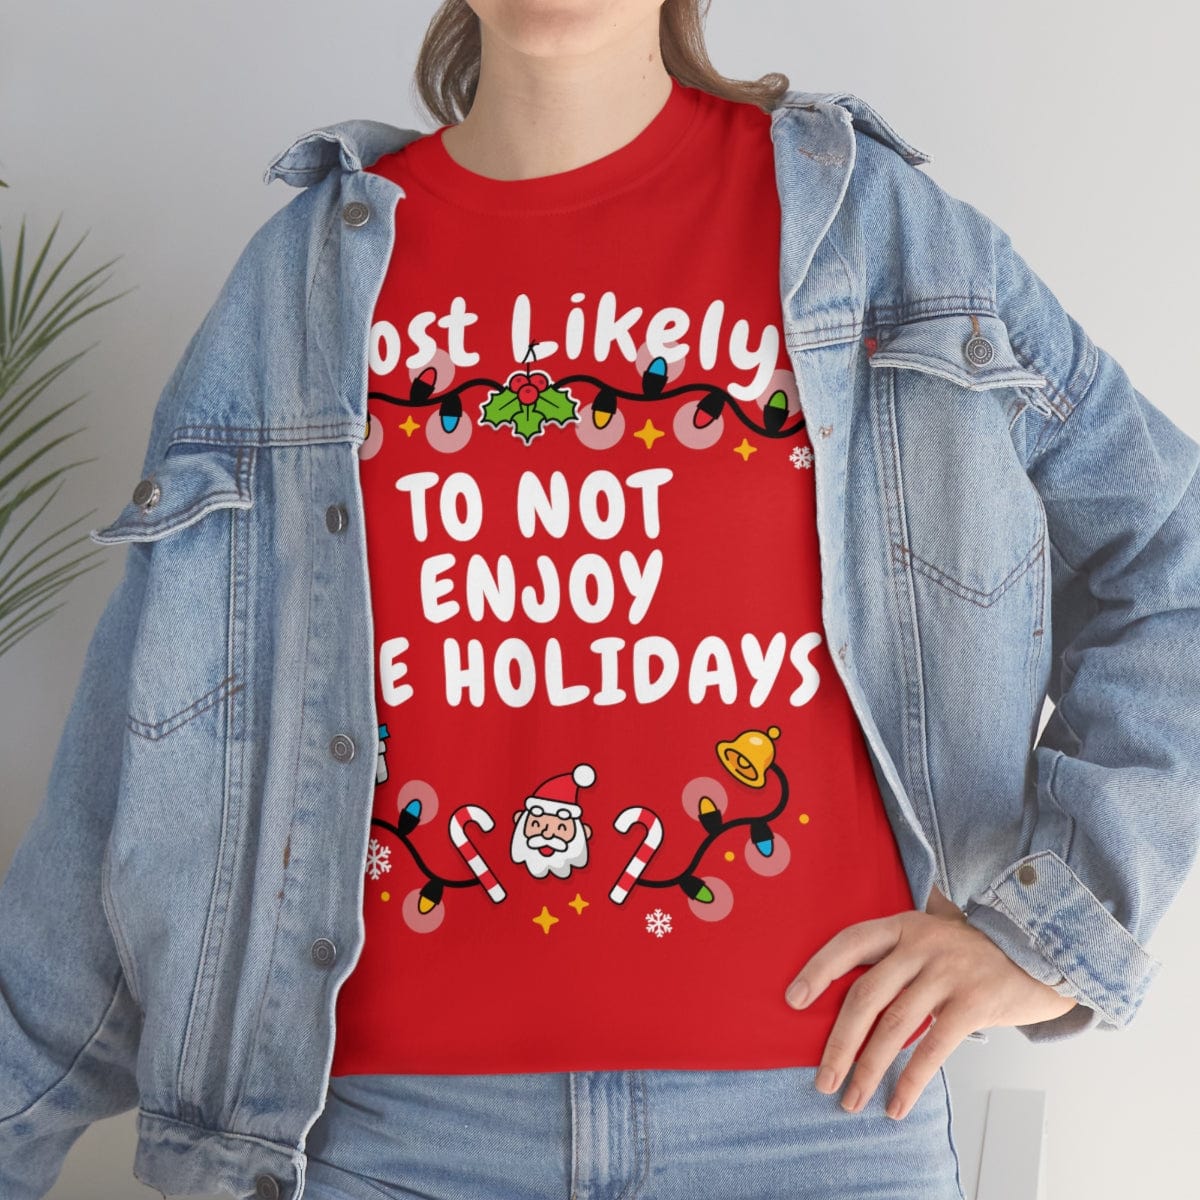 TO NOT ENJOY THE HOLIDAYS